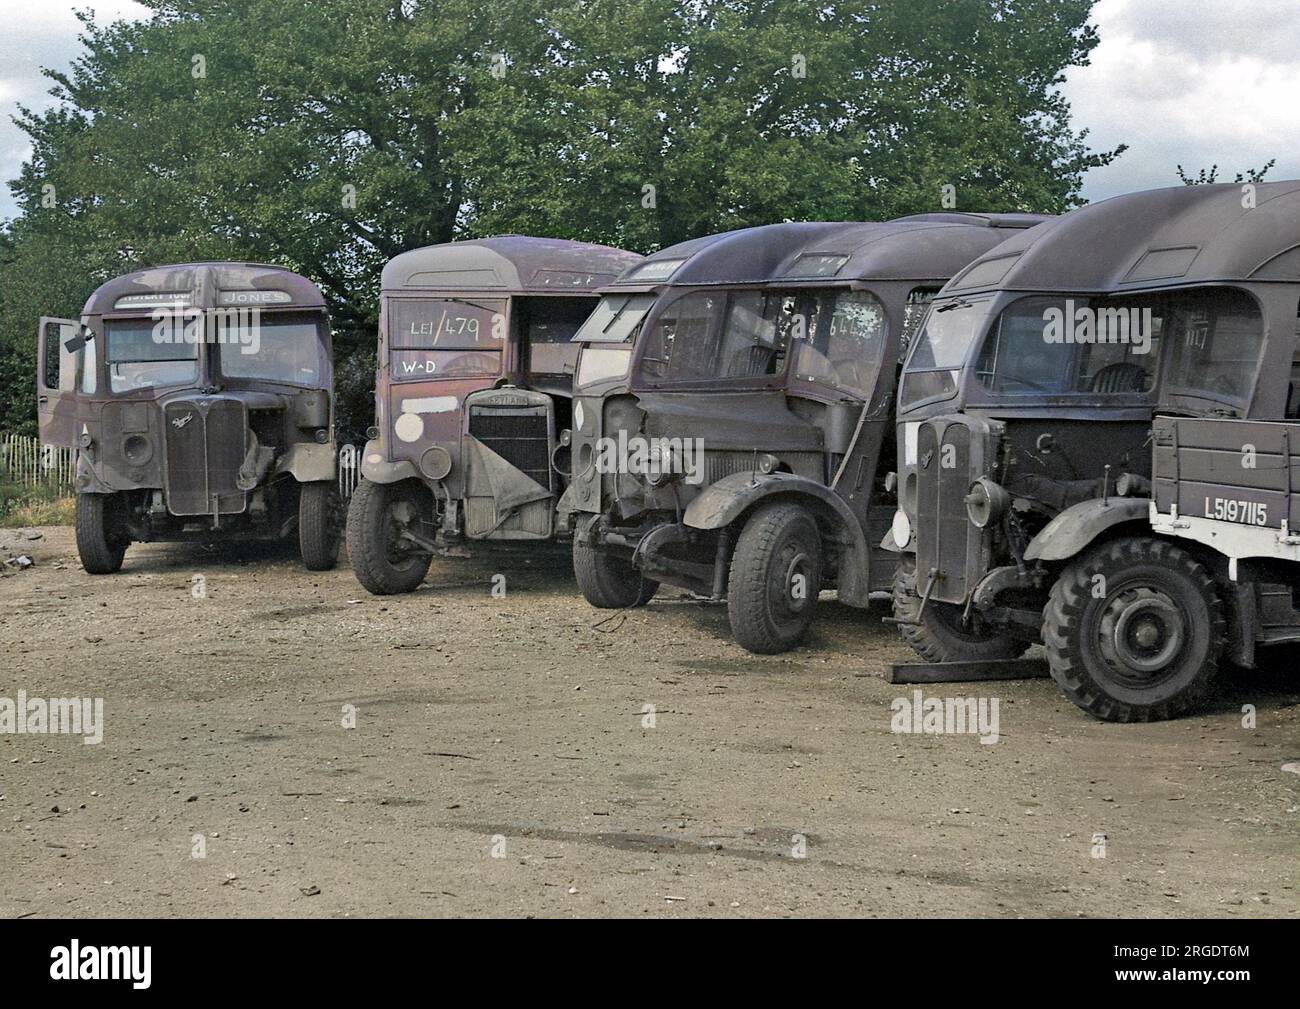 Vehicles in a yard, waiting to be repaired, or perhaps they are beyond repair and are being held for spare parts. Stock Photo